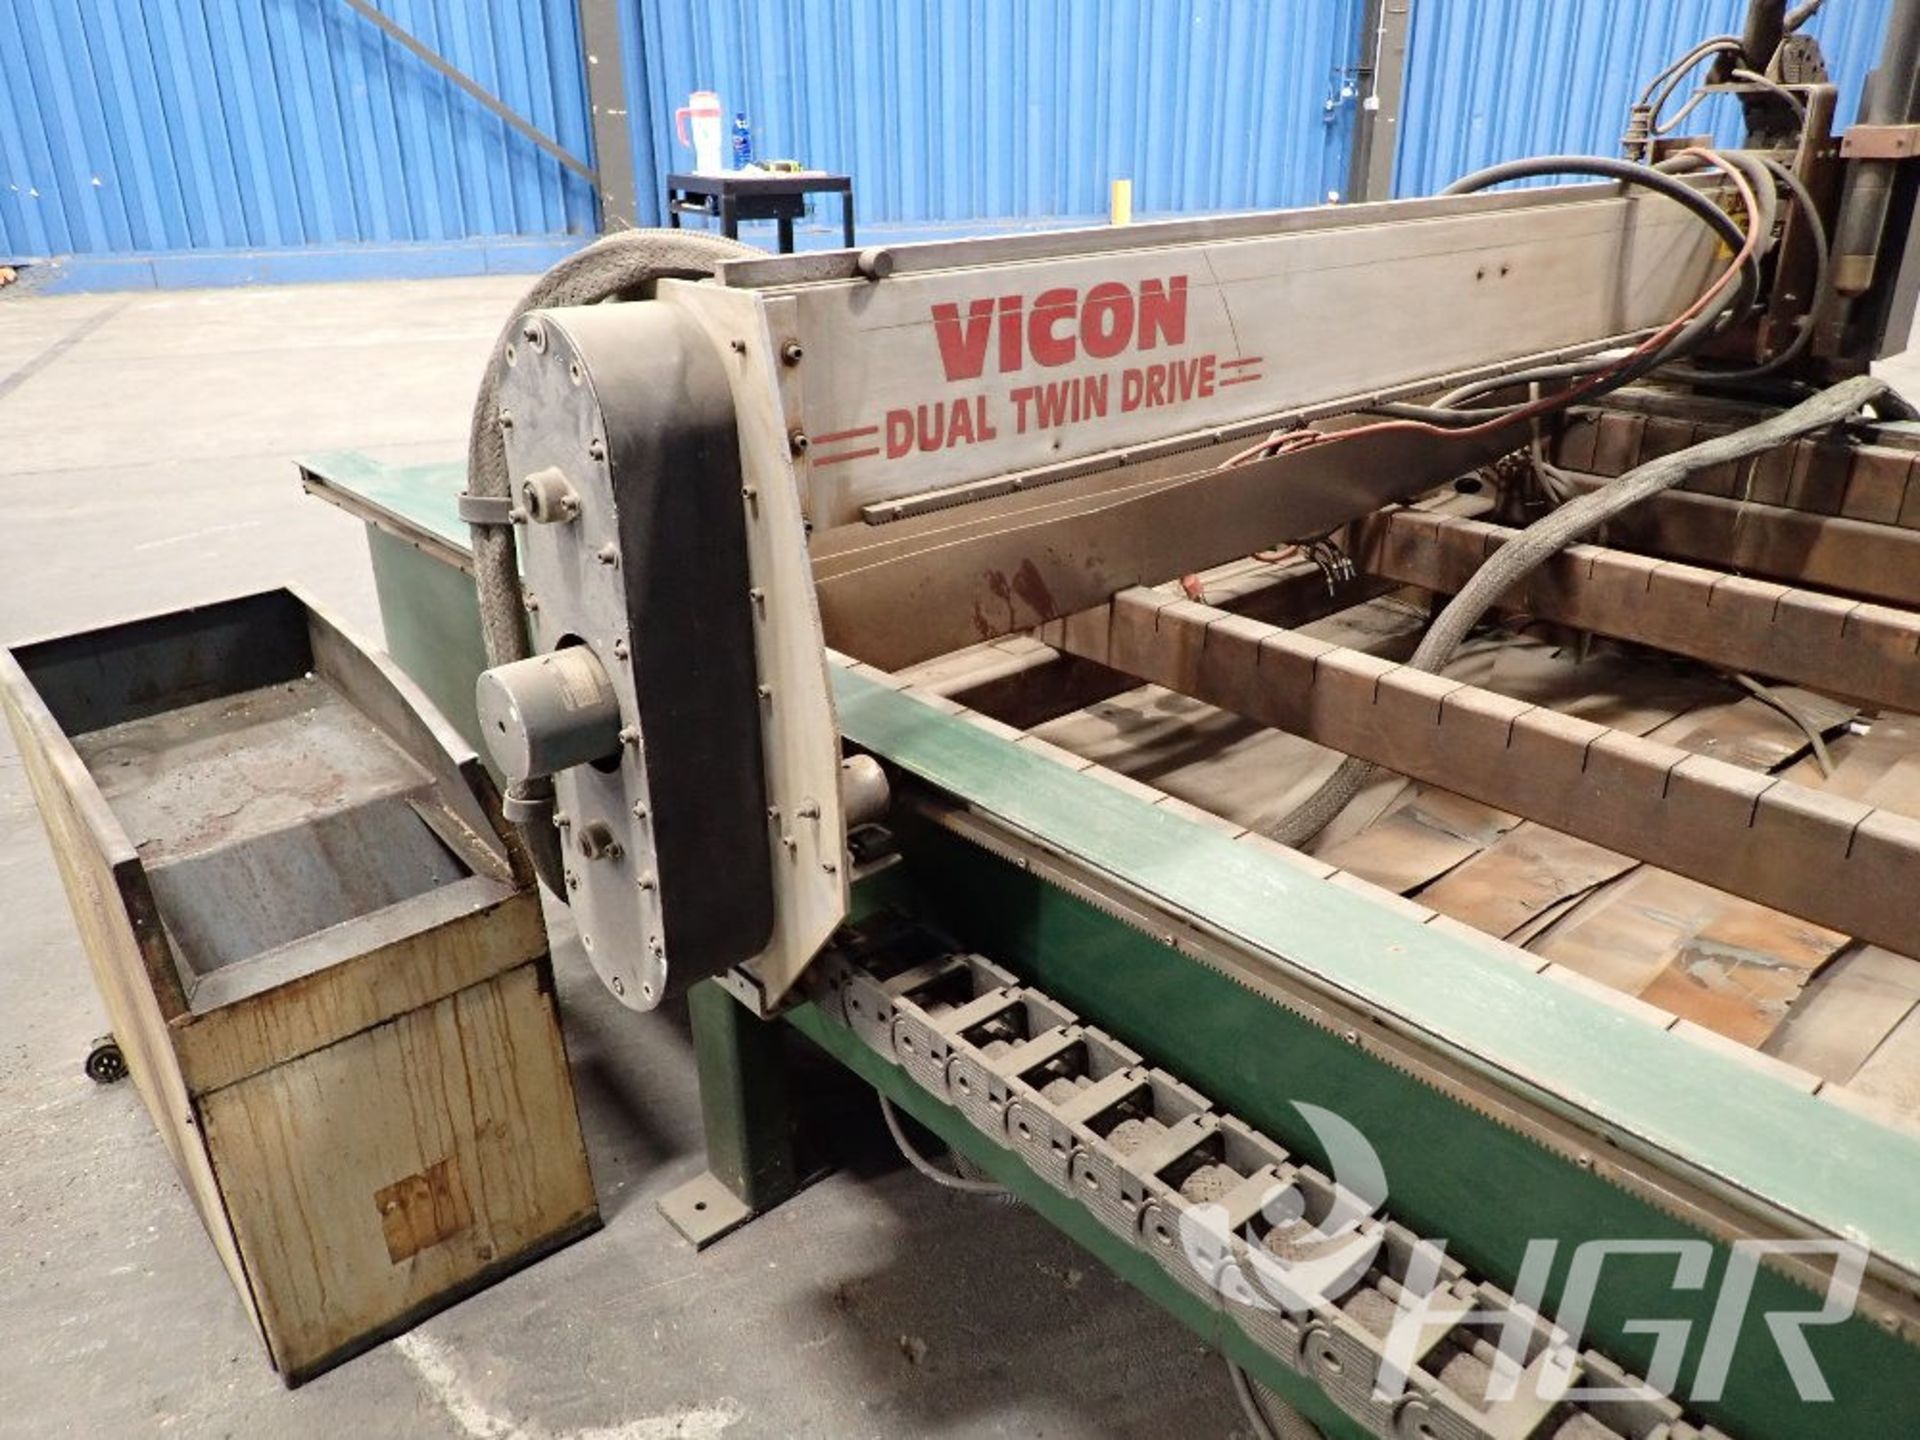 VICON PLASMA TABLE , Model n/a, Date: n/a; s/n n/a, Approx. Capacity: 84X60, Power: n/a, Details: - Image 15 of 25